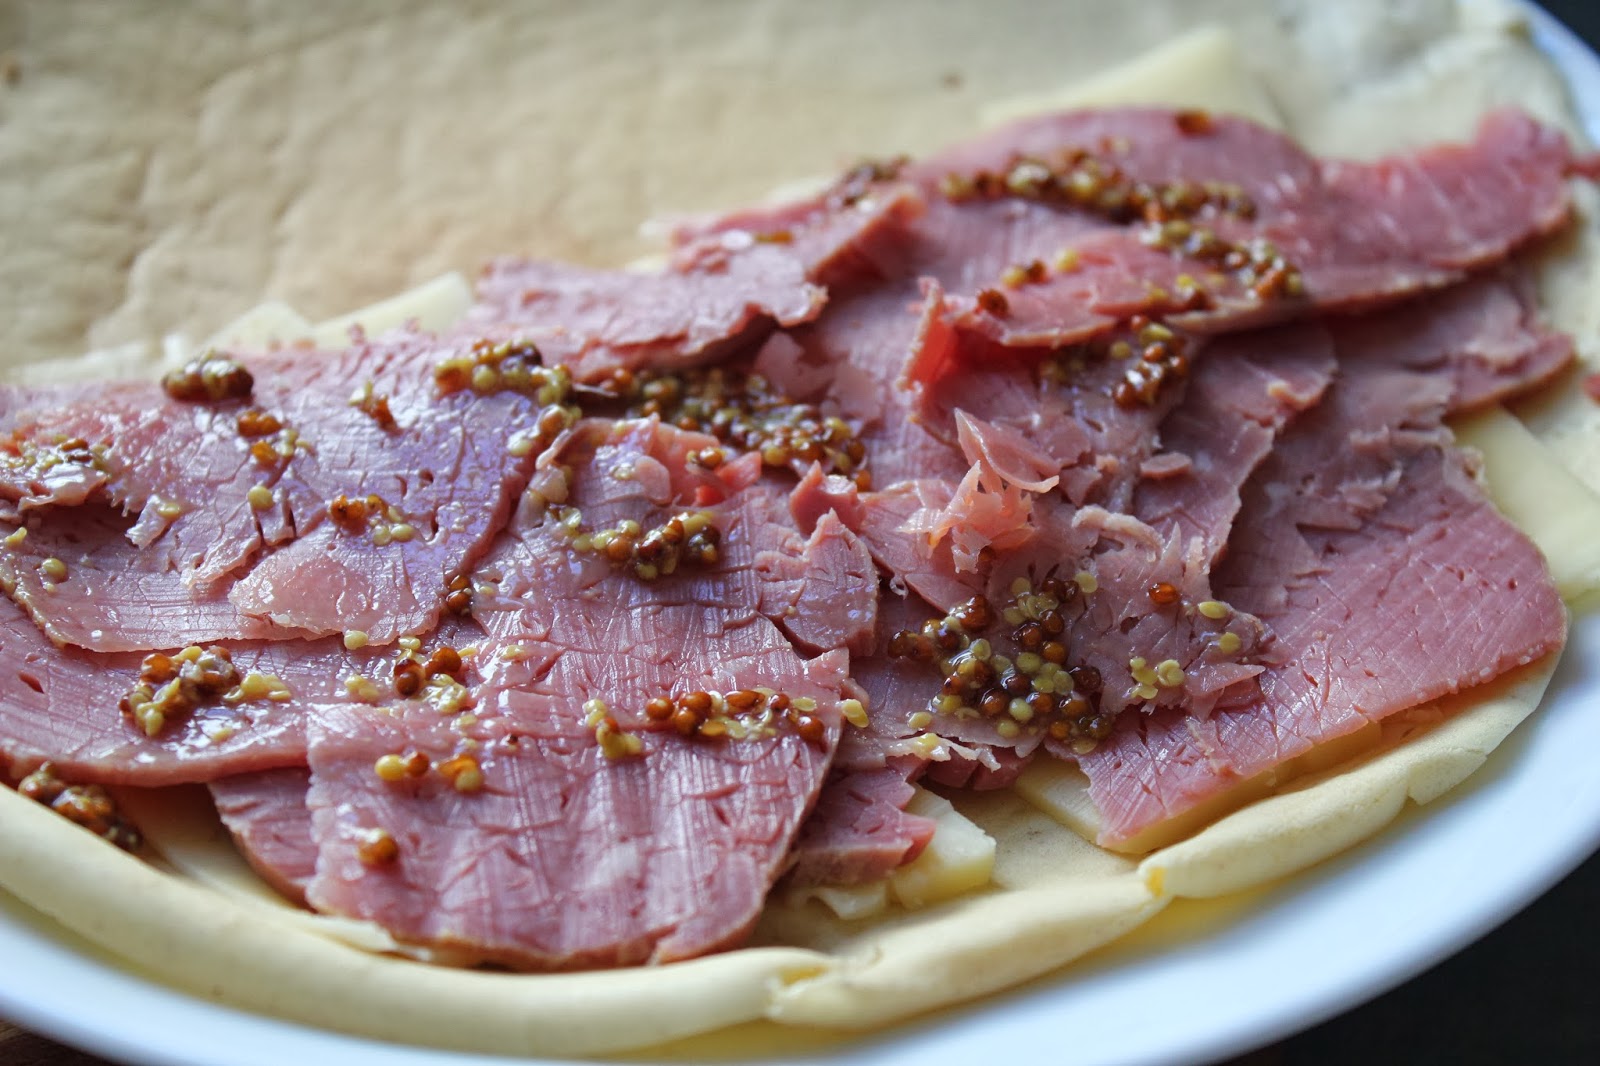 Rye crepes with cheese, corned beef, and mustard